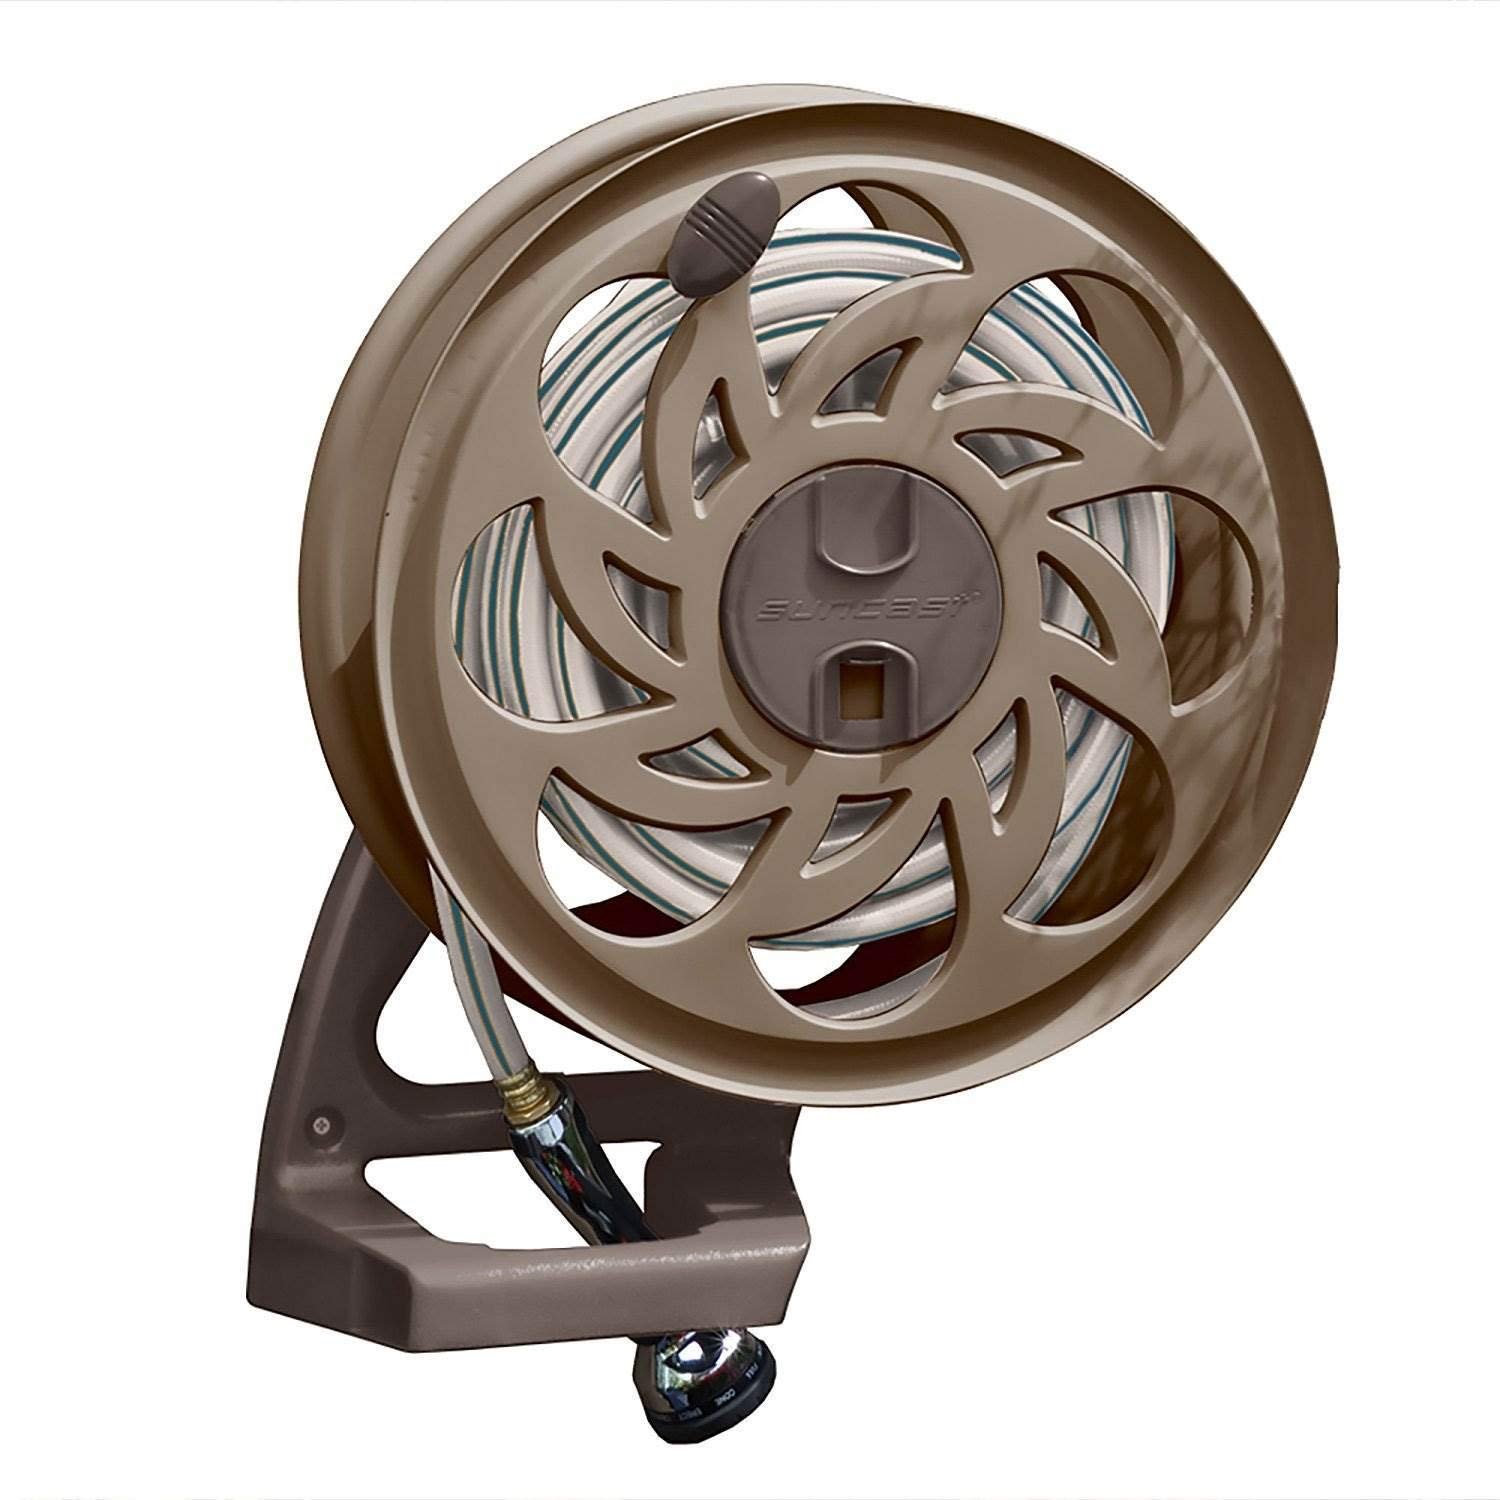 Suncast Sidetracker Garden Hose Reel with Guide - Fully Assembled Outdoor Wall Mount Tracker with Removable Reel - 125' Hose Capacity - Dark Taupe - image 1 of 4